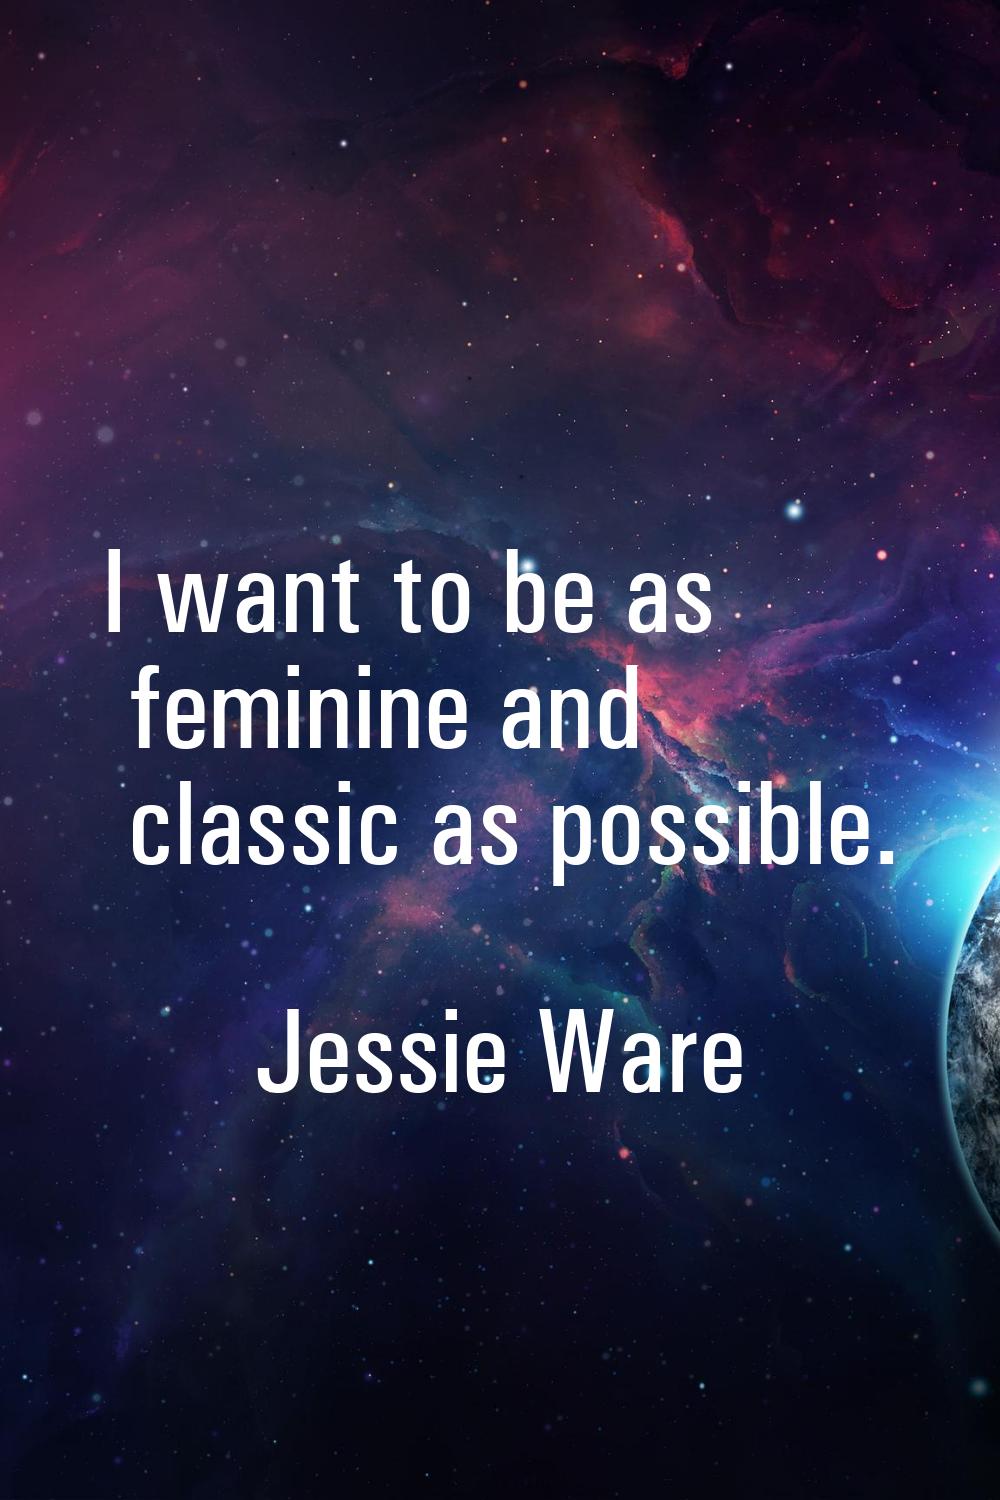 I want to be as feminine and classic as possible.